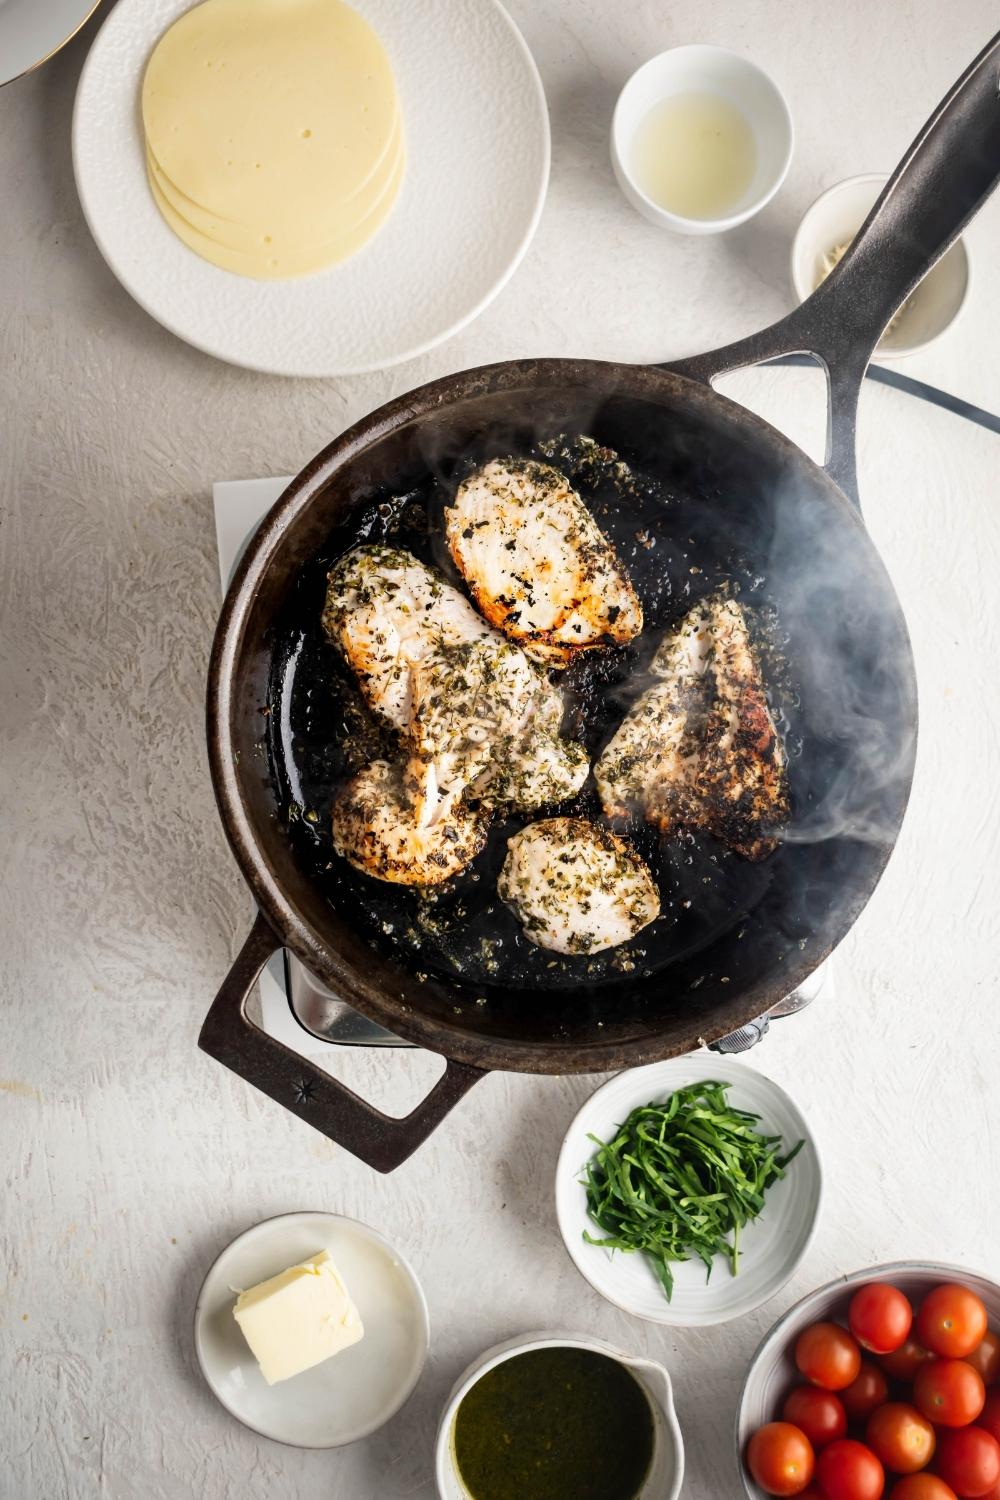 Four chicken breasts being cooked in a skillet. The chicken breasts are surrounded by a plate of mozzarella cheese, a bowl of pasta, part of a ball grape tomatoes, and a plate with a slab butter on it on a white counter.